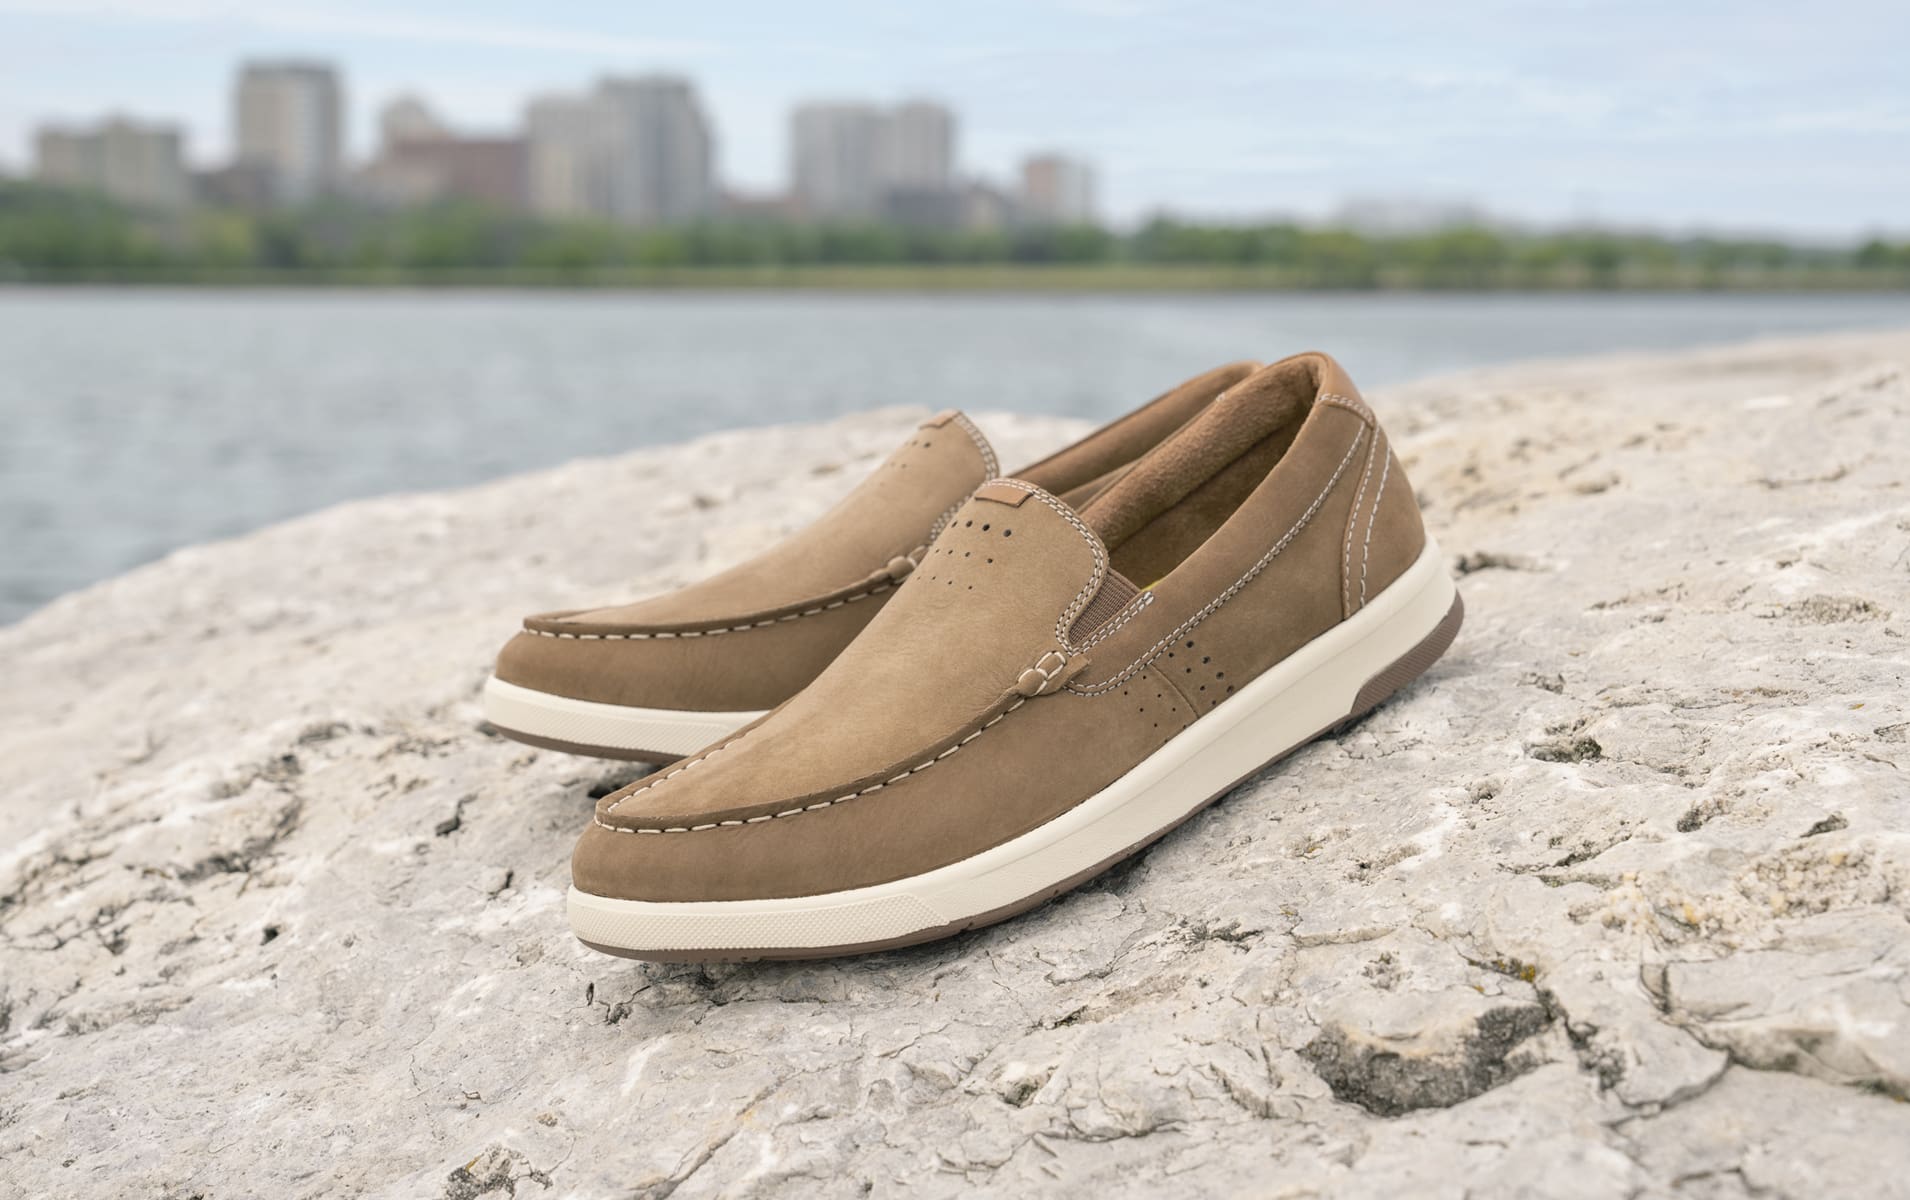 Click to shop Florsheim casuals. Image features the Crossover slip on in mushroom.